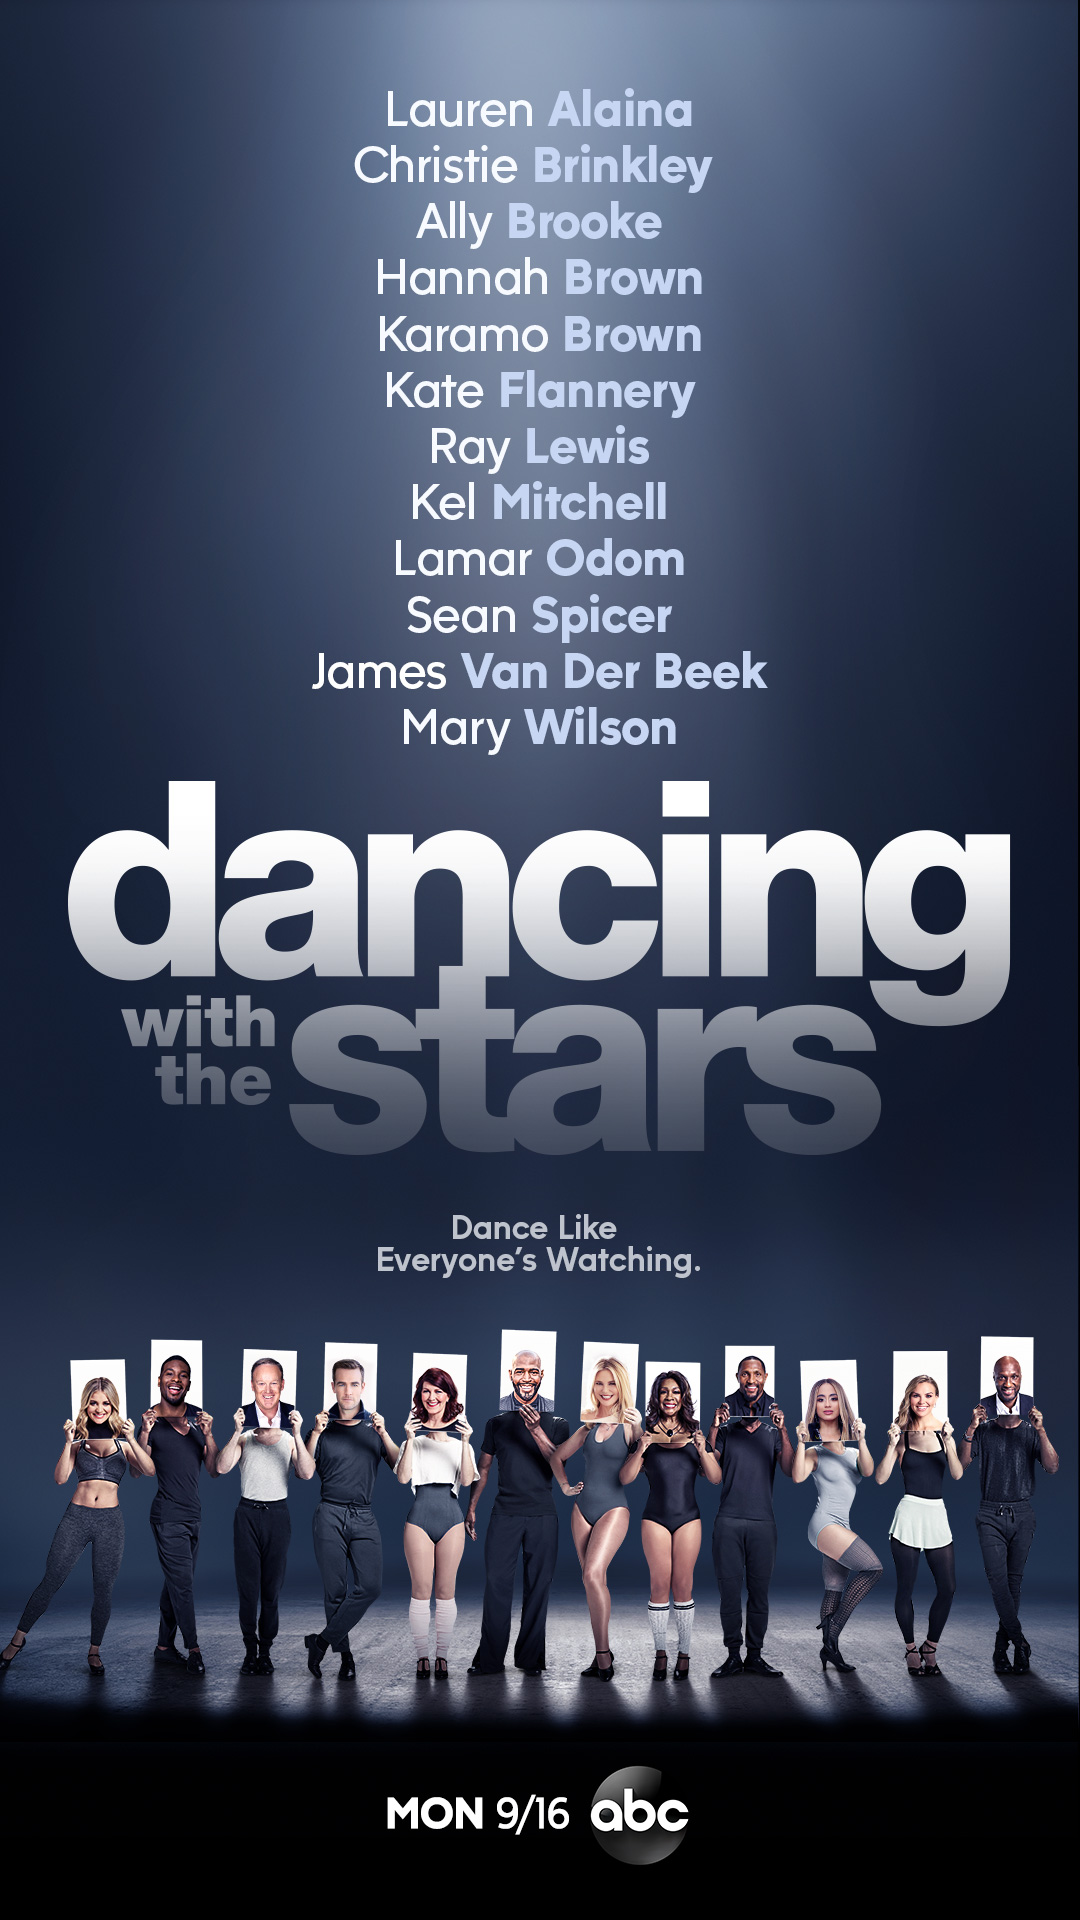 With a lineup of celebrities including a supermodel, a former White House press secretary, a Bachelorette, pro-athletes from the NFL and NBA, a Supreme and a TV icon to name a few, "Dancing with the Stars" is waltzing its way into its highly anticipated upcoming 2019 season. (ABC)